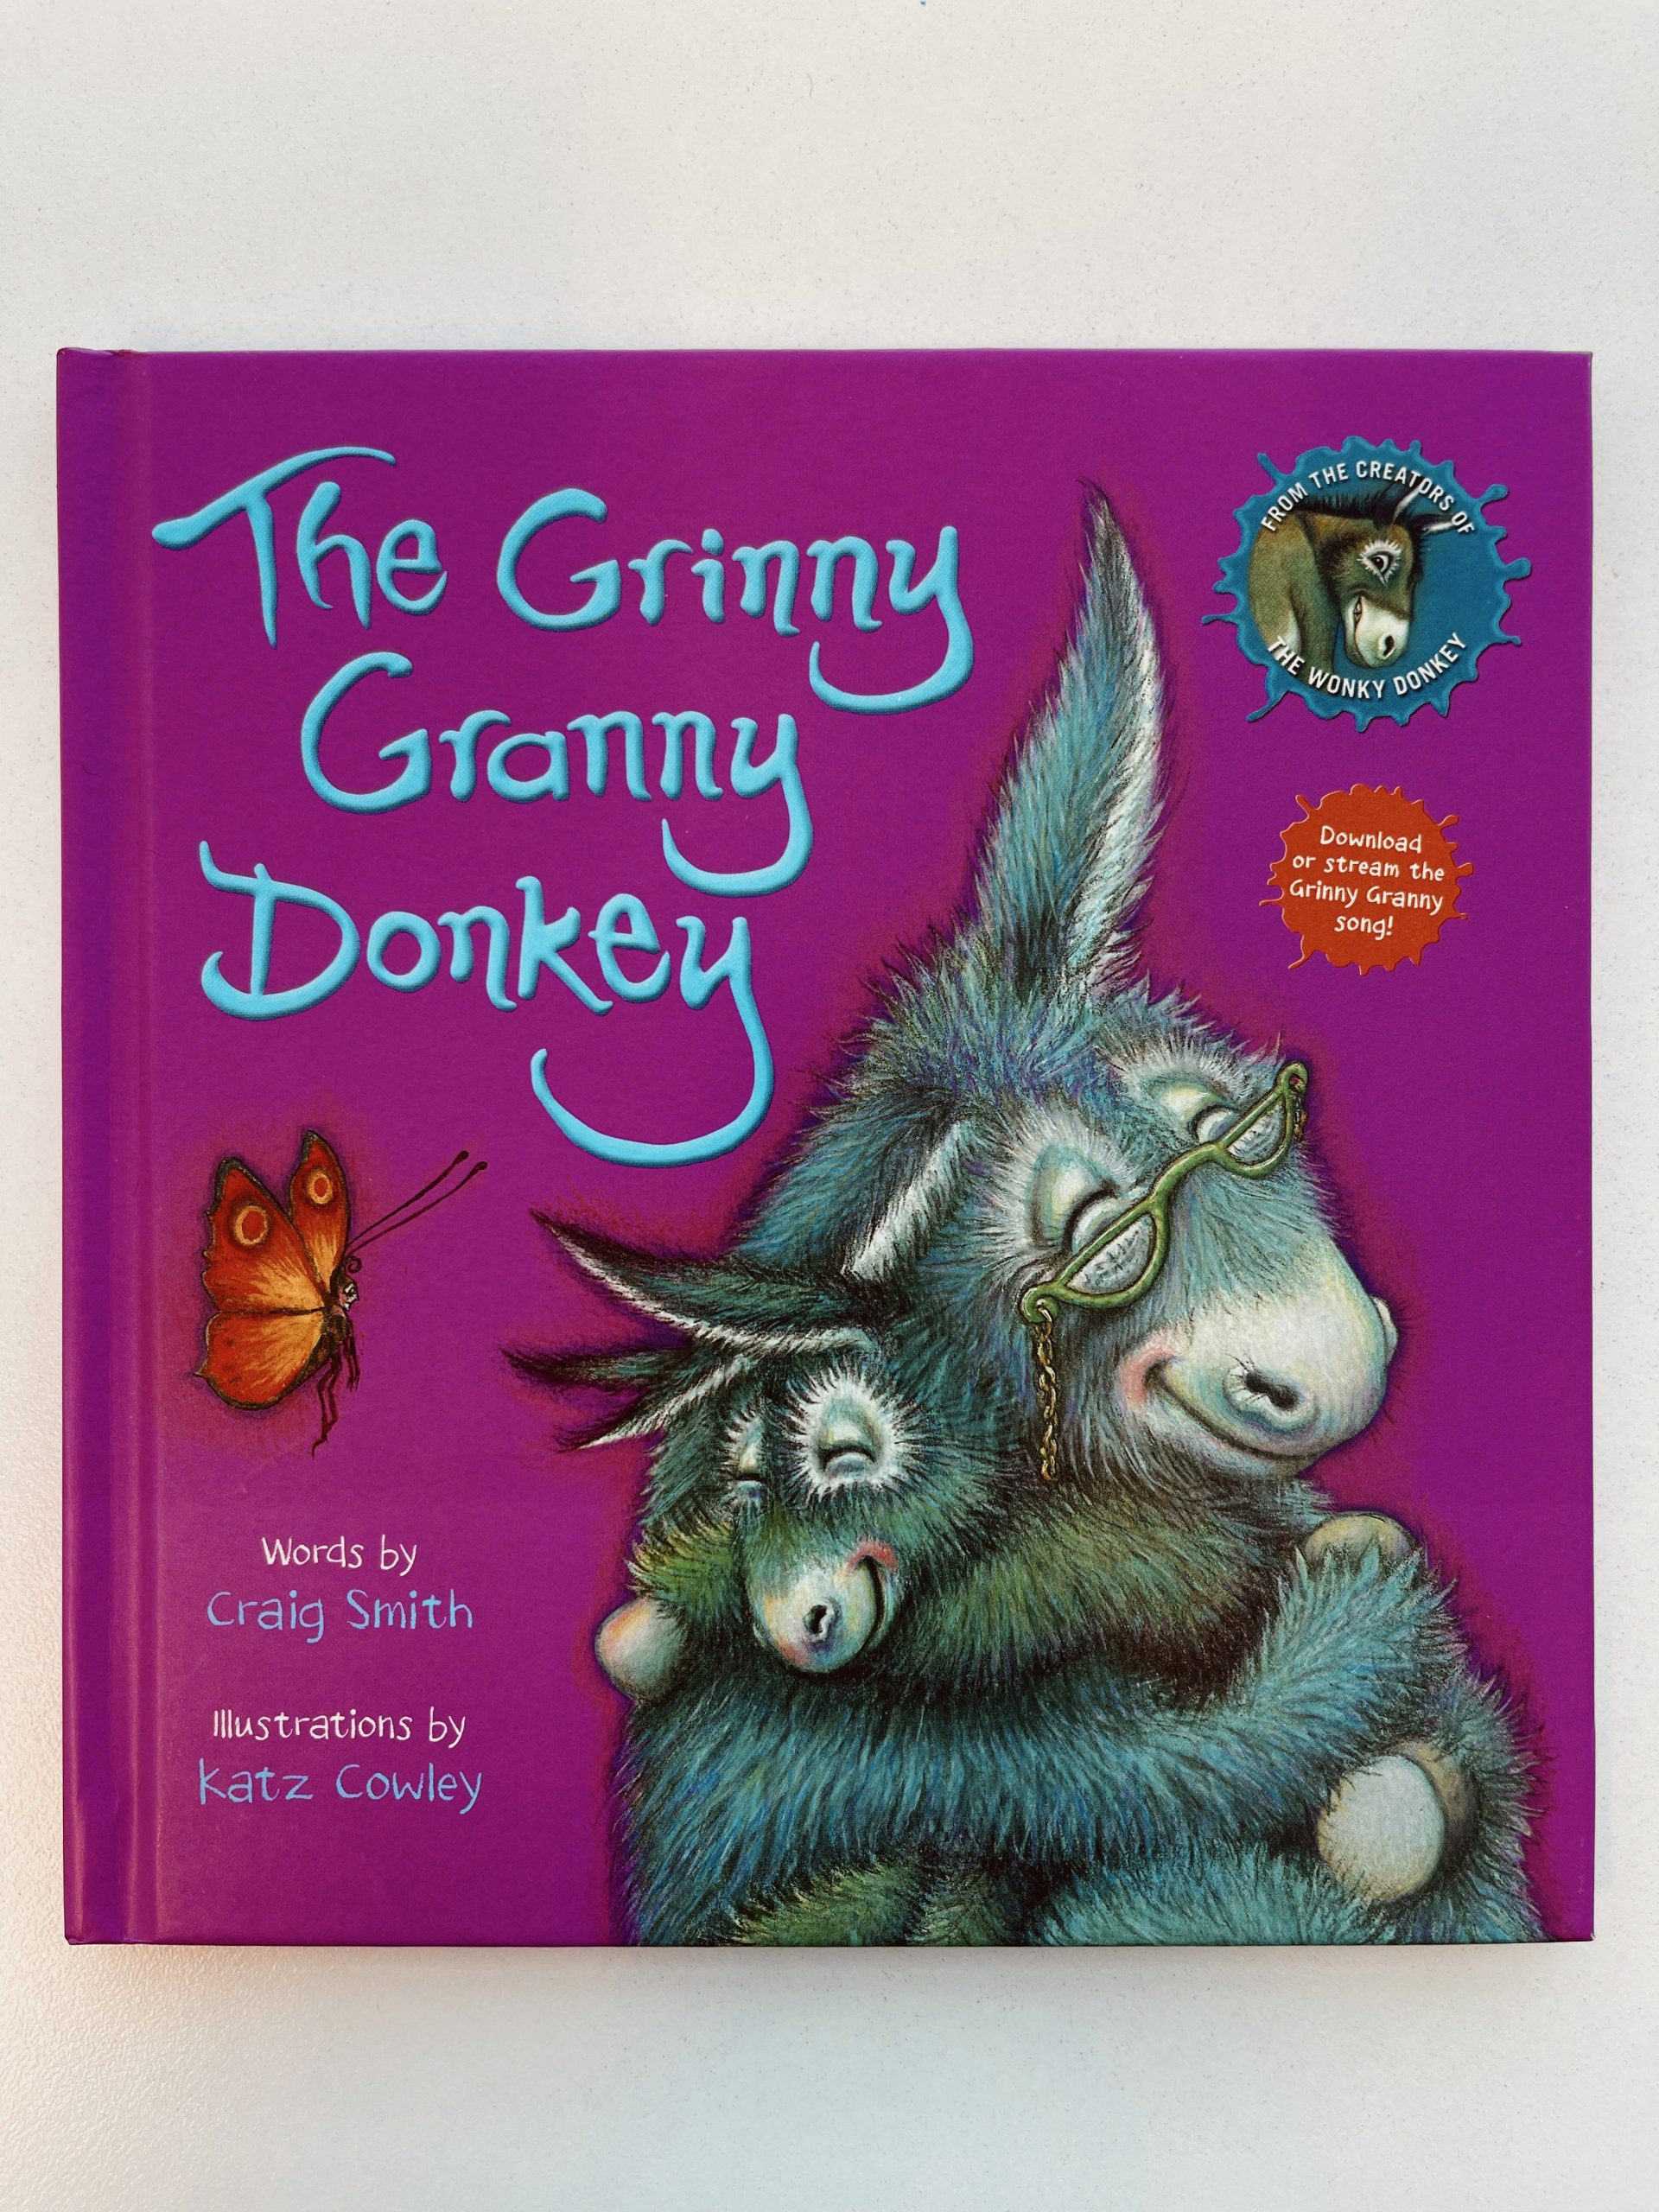 The Wonky Donkey Childrens Collection 5 Books Set by Craig Smith (The